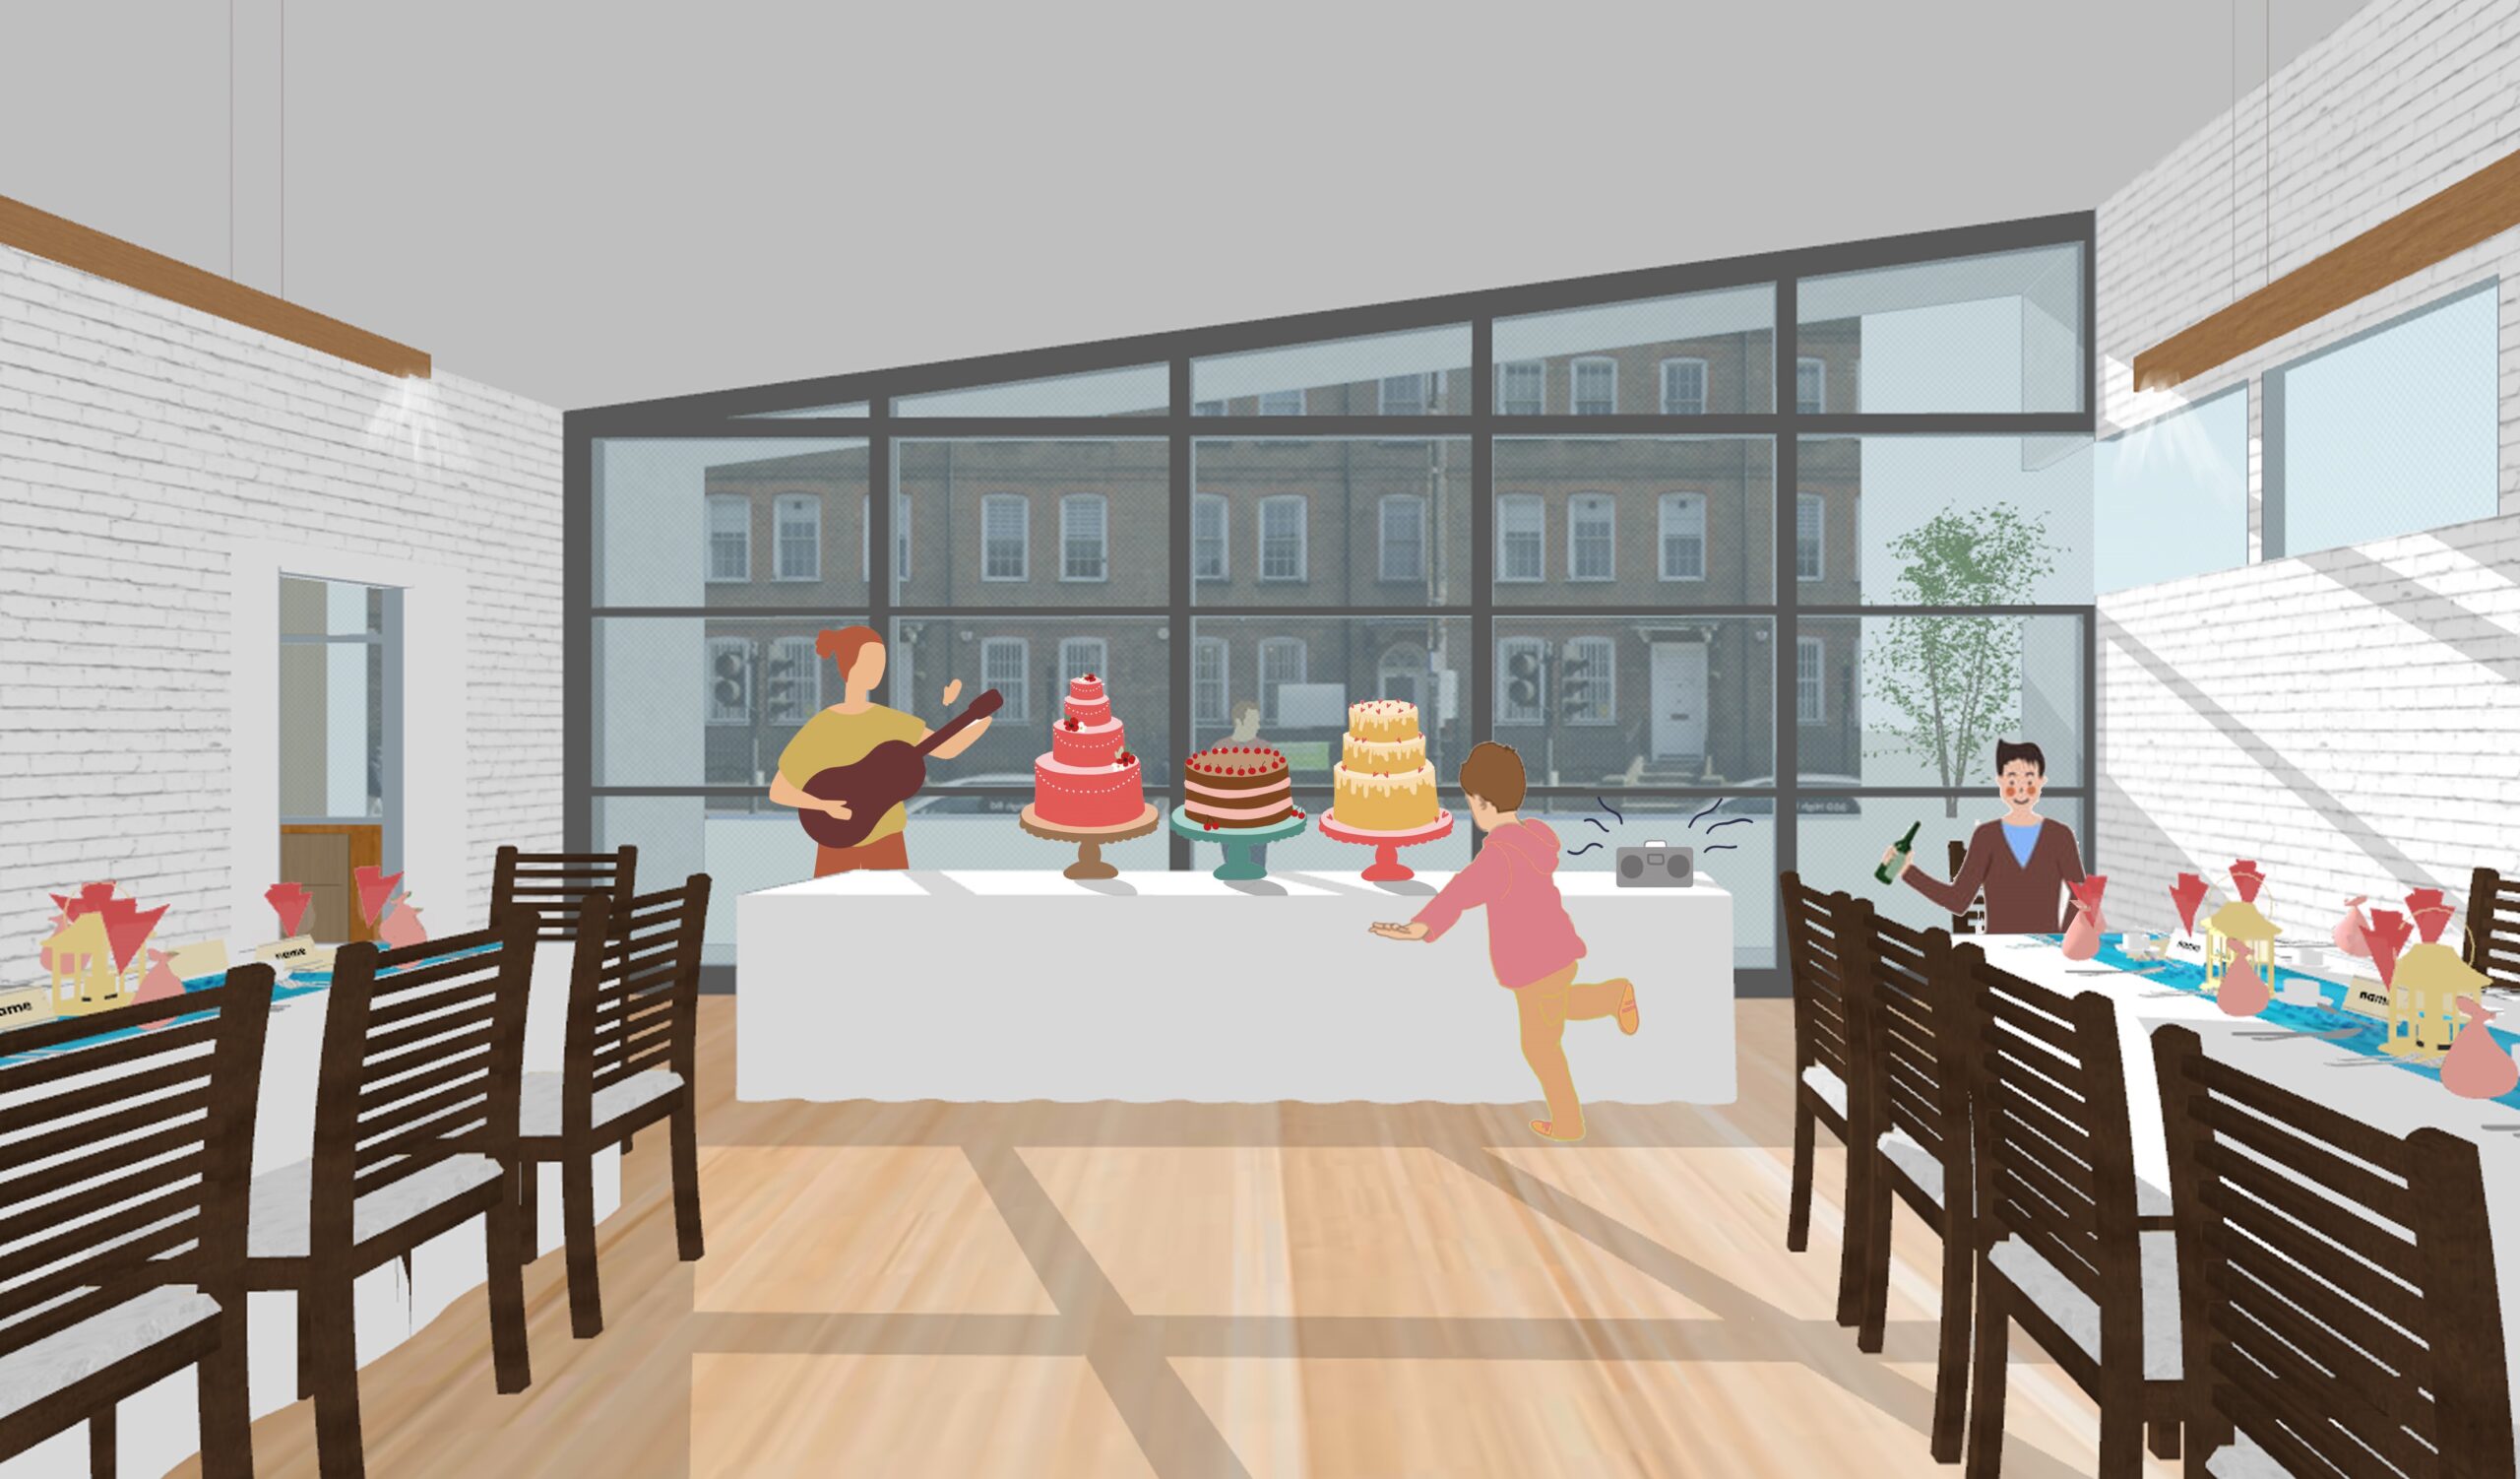 Table of cakes in the centre of the image with tables to either side, illustrating the interior of the cafe